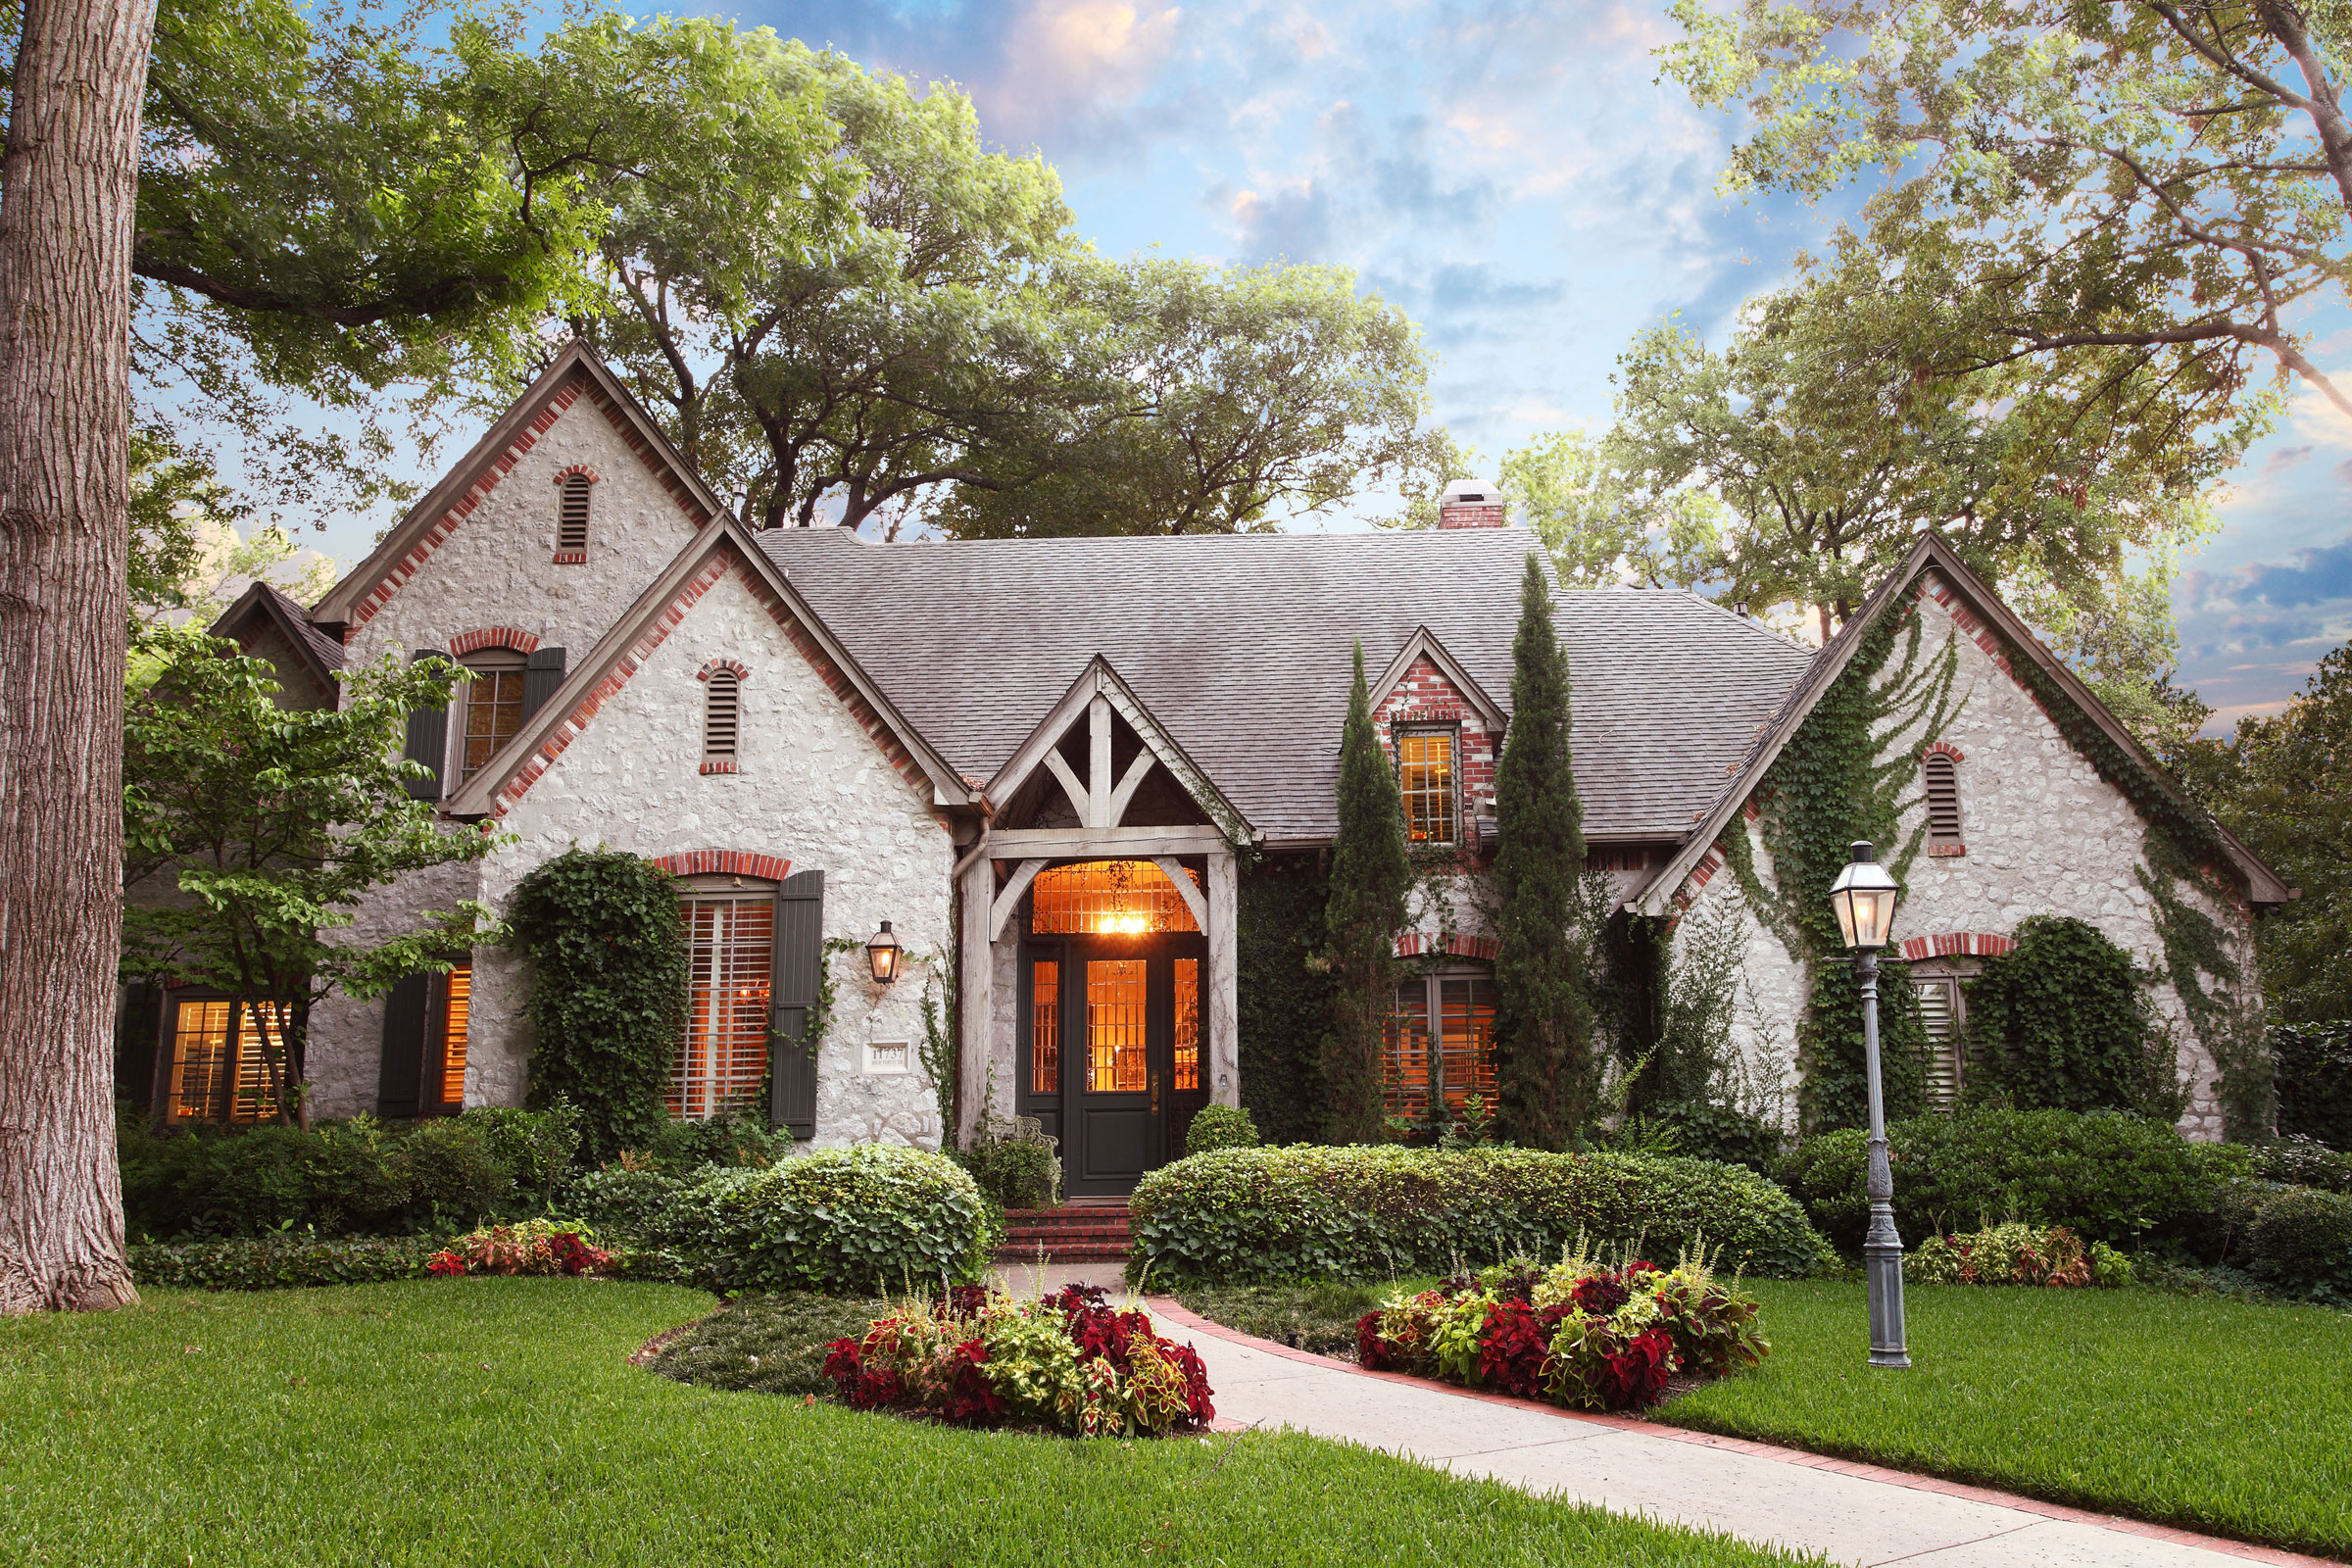 The 10 Most Beautiful Homes in Dallas 2012 - D Magazine